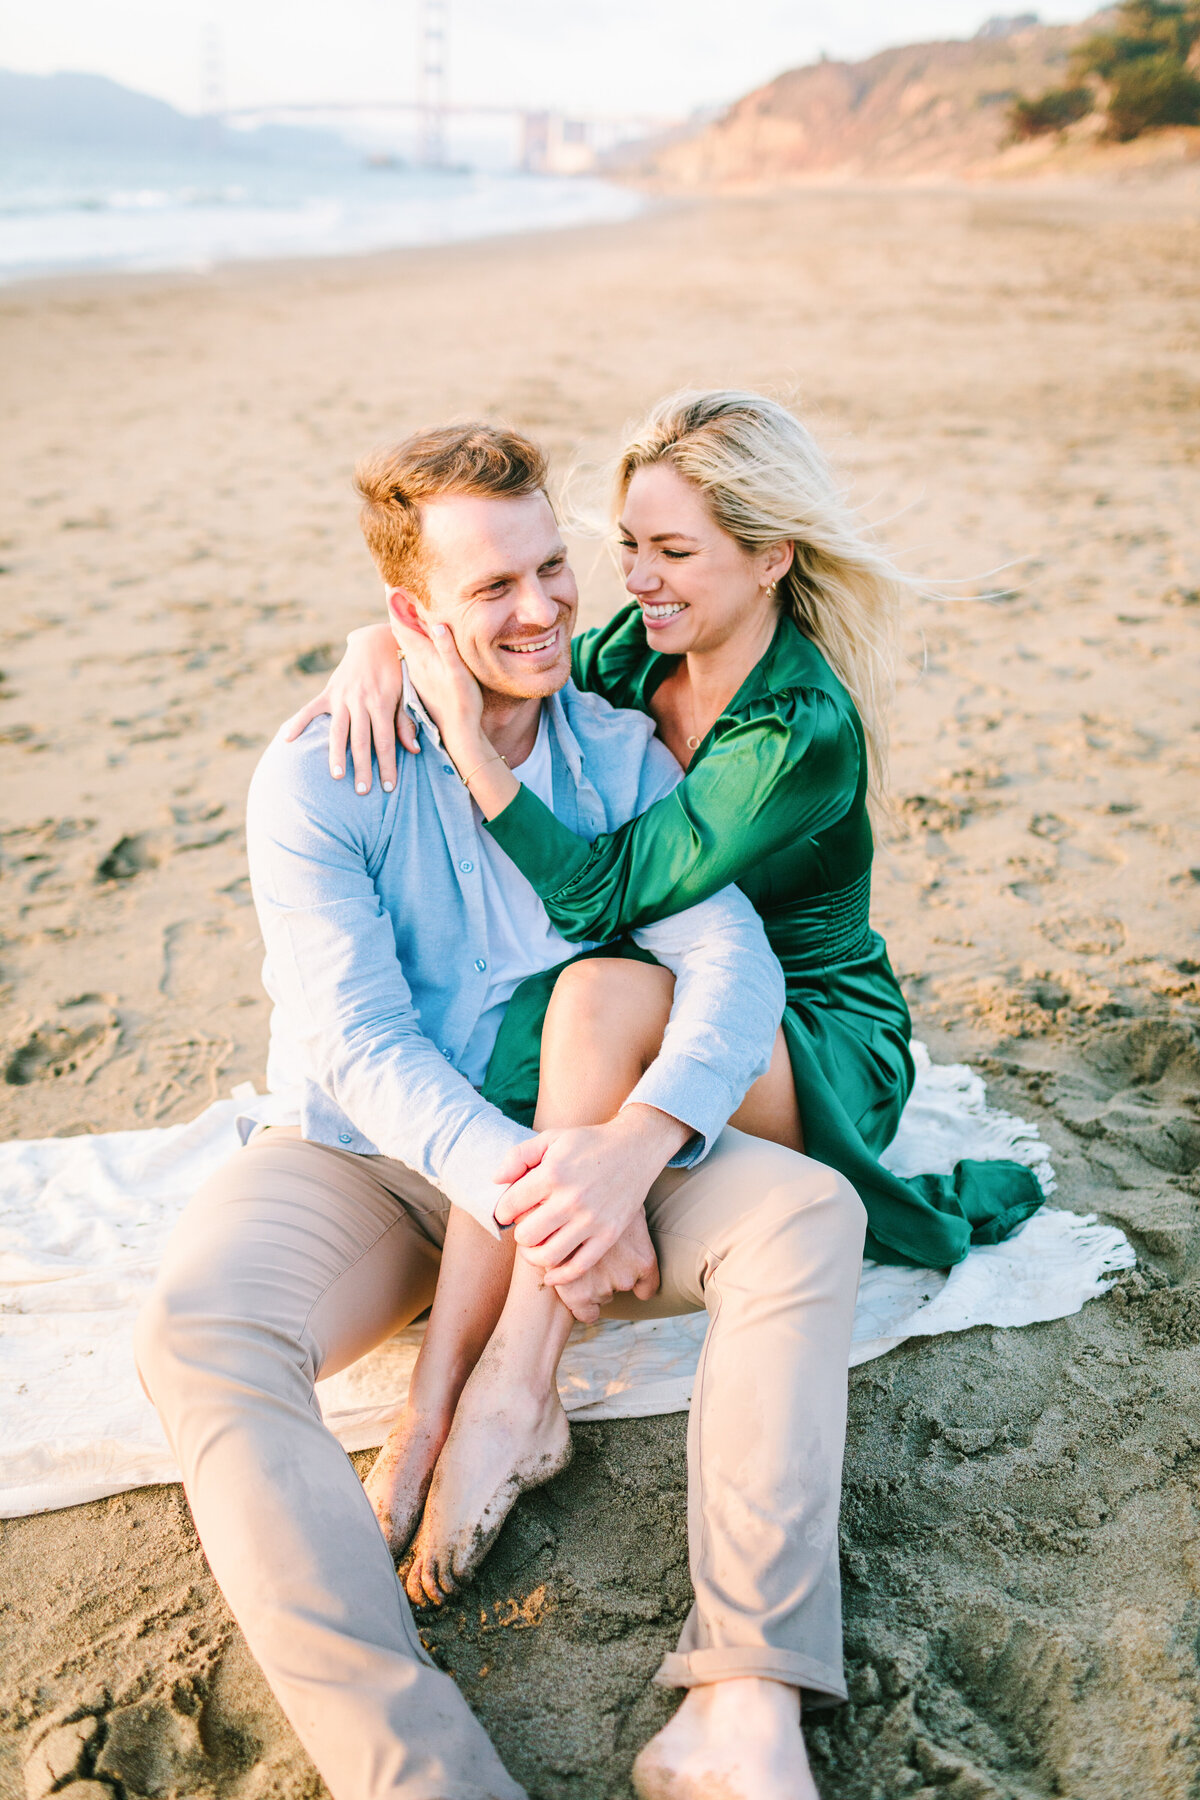 Best California and Texas Engagement Photographer-Jodee Debes Photography-272